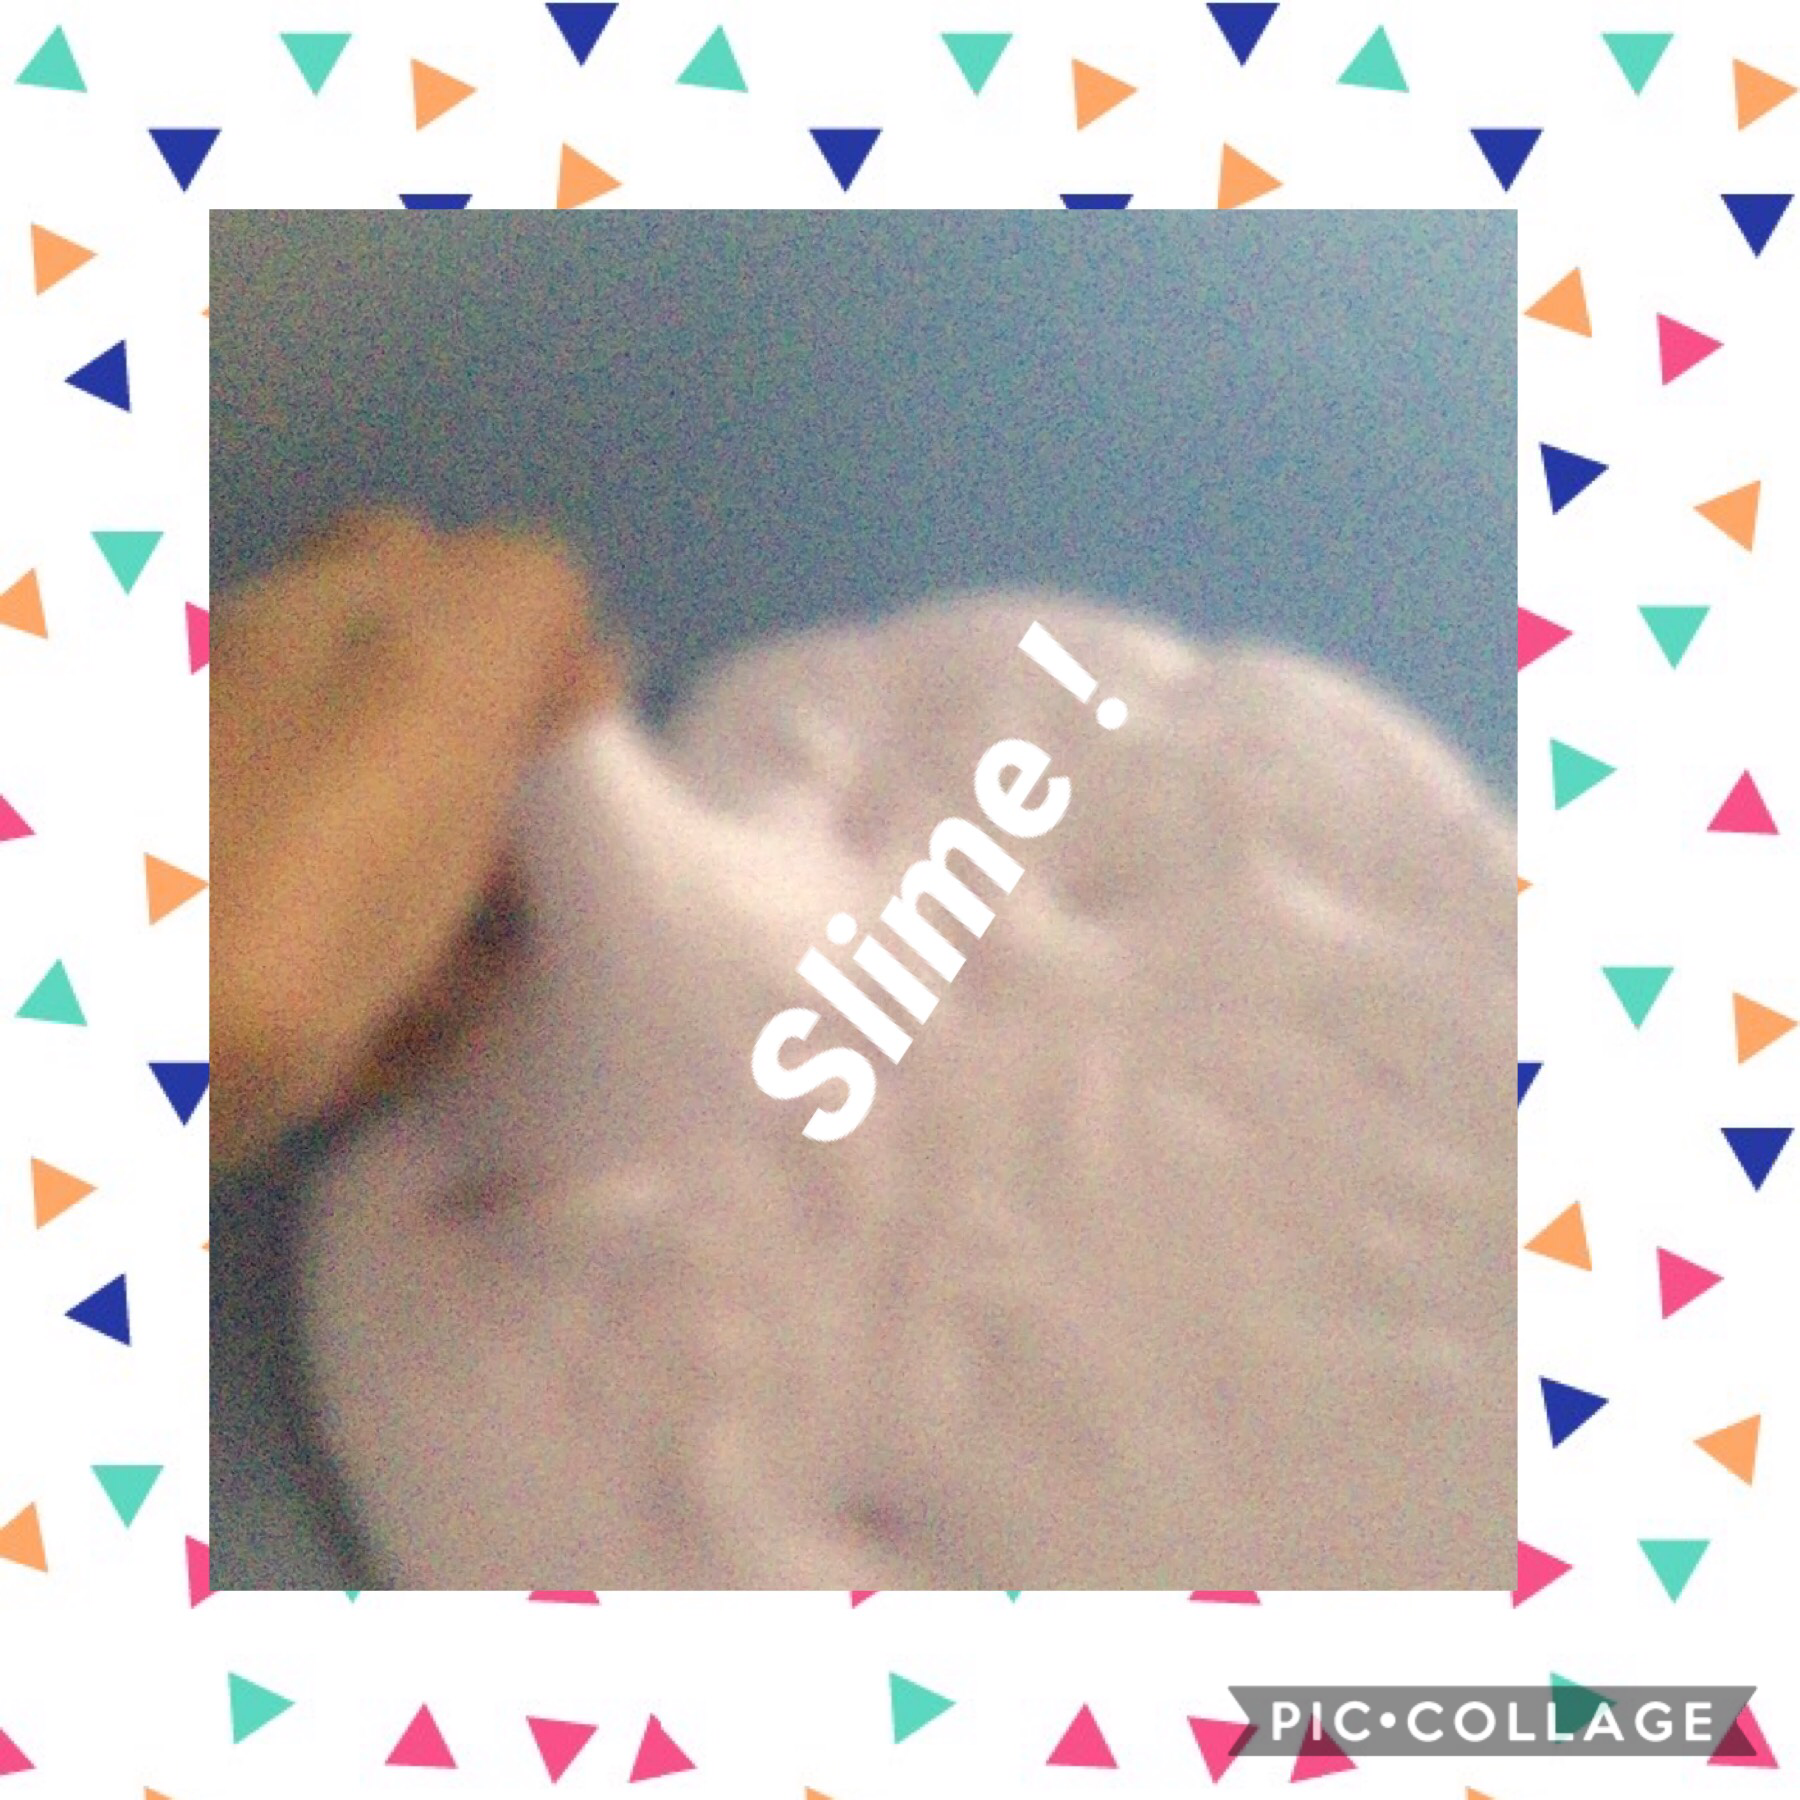                     Tap!!!😦
Slime !!!! 
 Post a picture of you making slime and I will comment on it or like it 